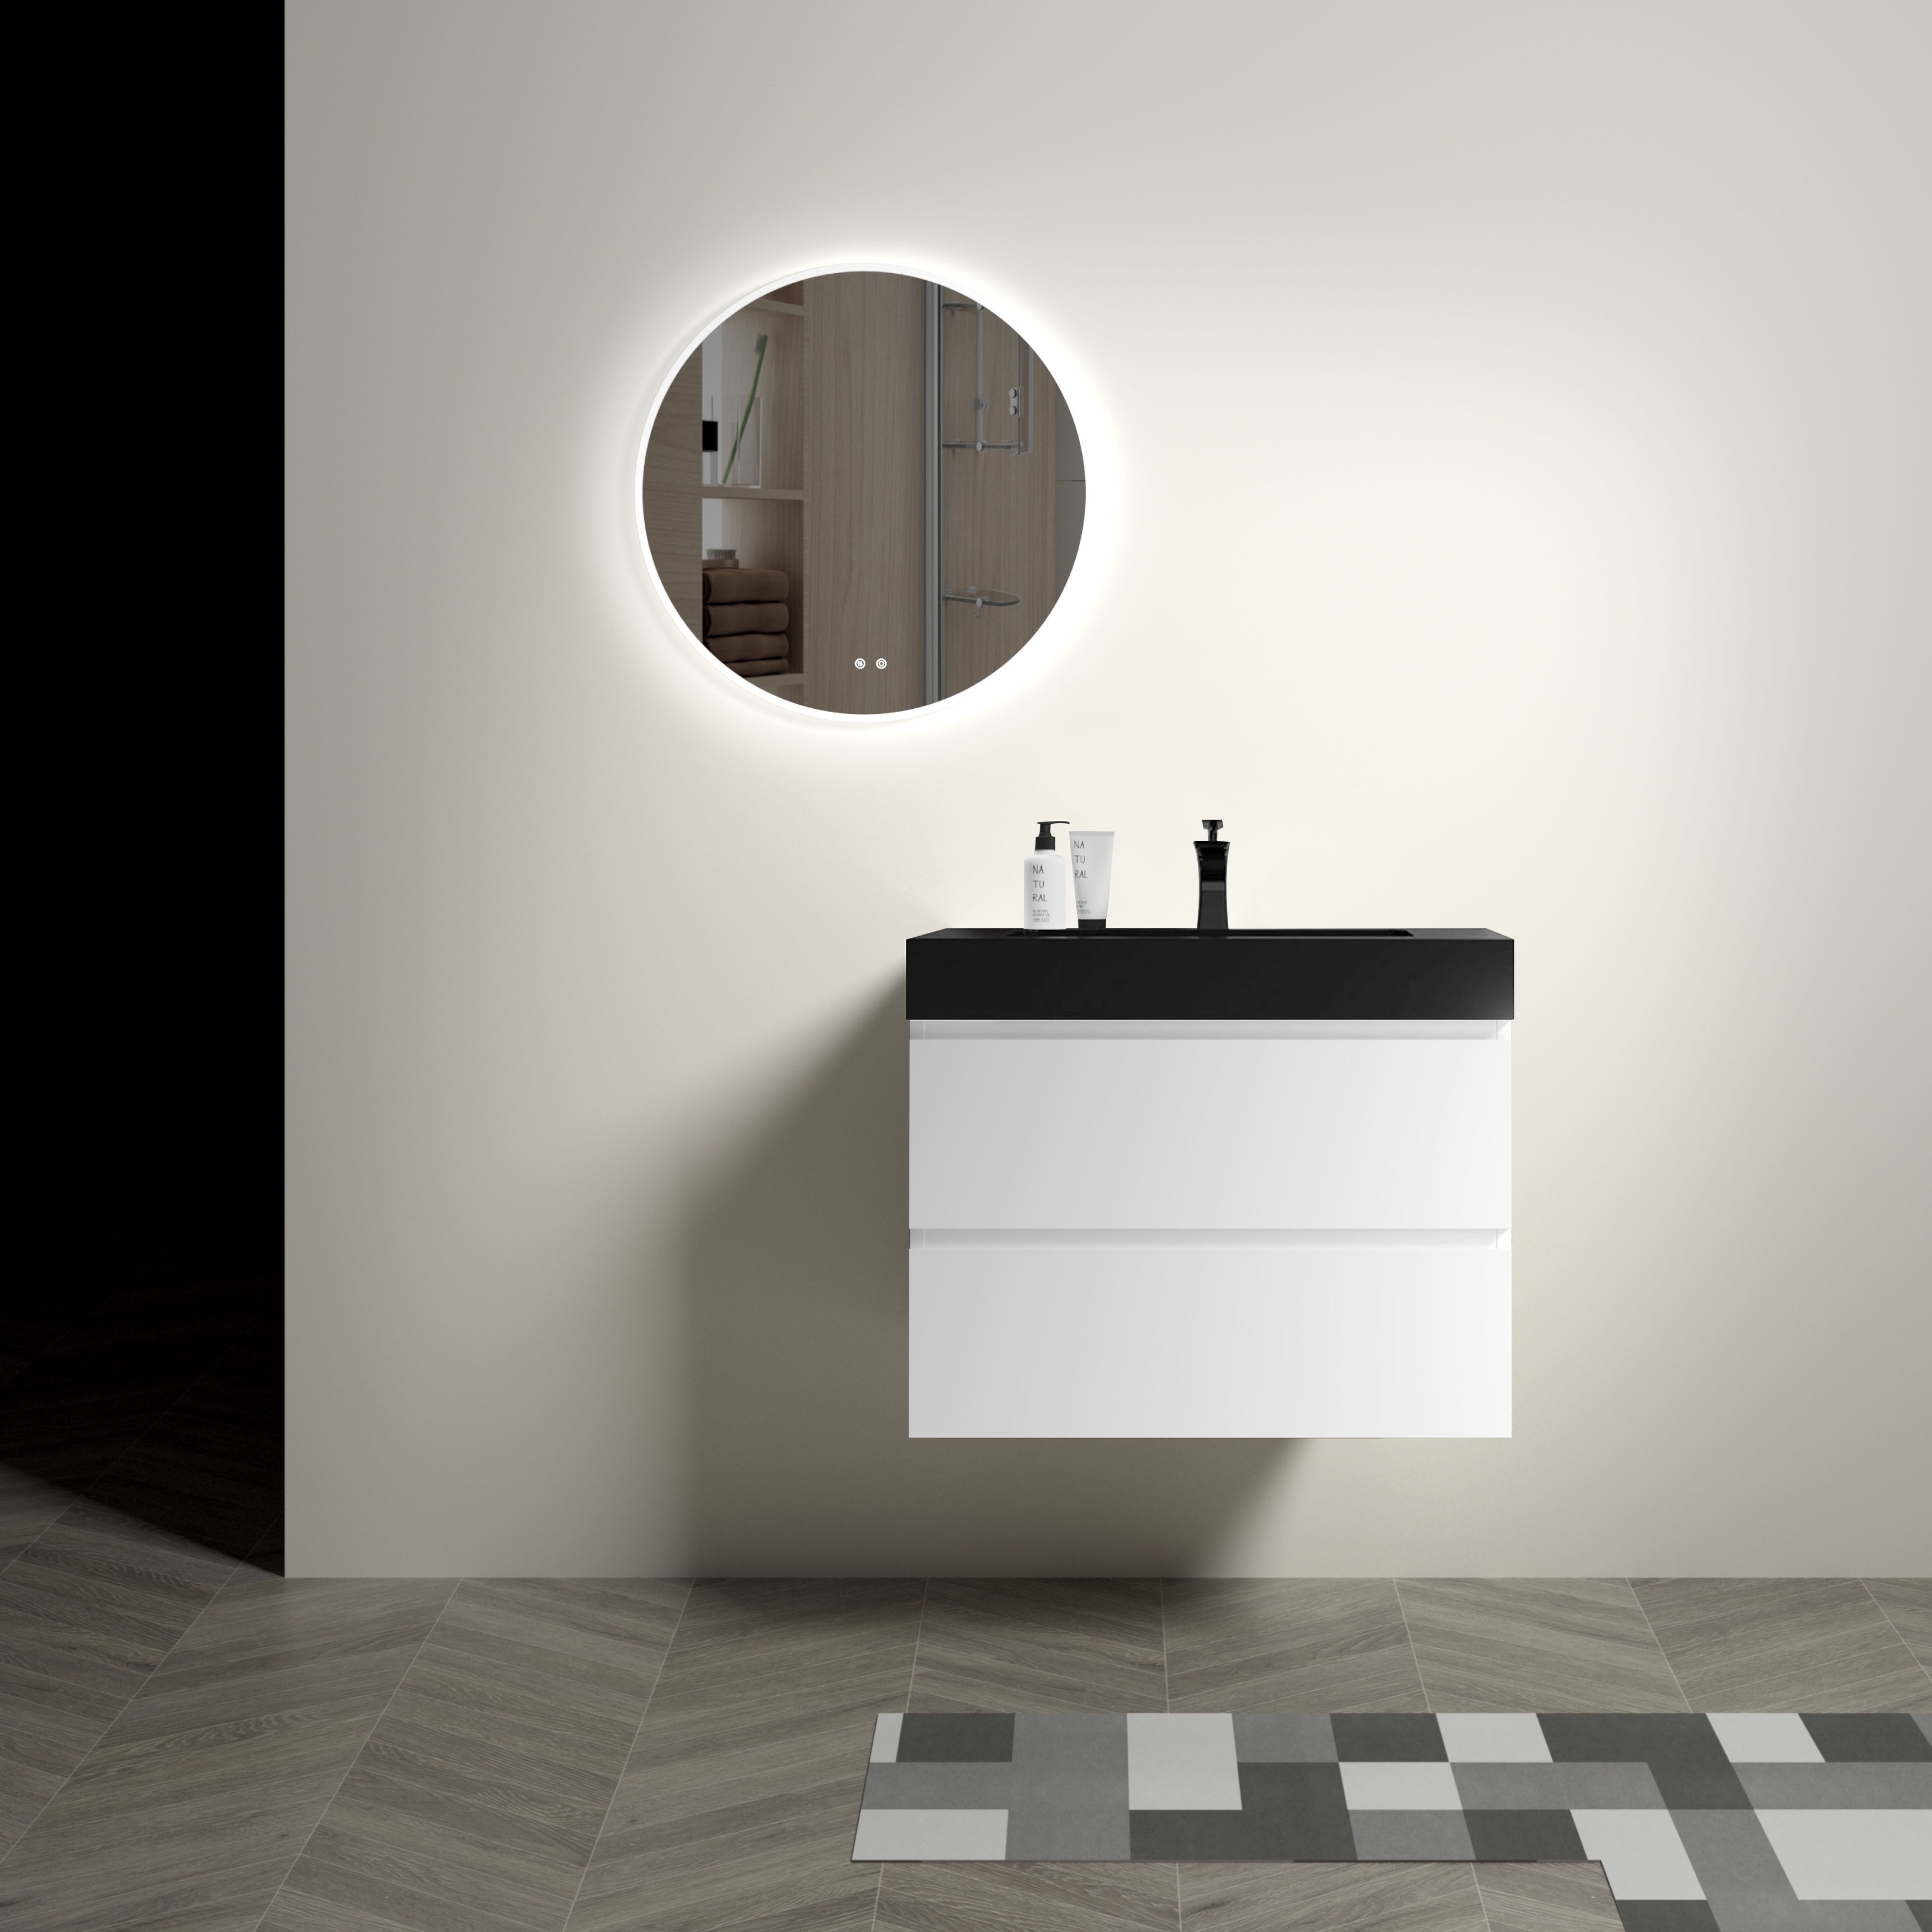 https://ak1.ostkcdn.com/images/products/is/images/direct/9c24367bb567a03542b9f287620208adb6d9af29/Bathroom-Vanity-with-Sink%2C-Large-Storage-Wall-Mounted-Floating-Bathroom-Vanity%2C-1-Piece-Sink-Basin-without-Drain-and-Faucet.jpg